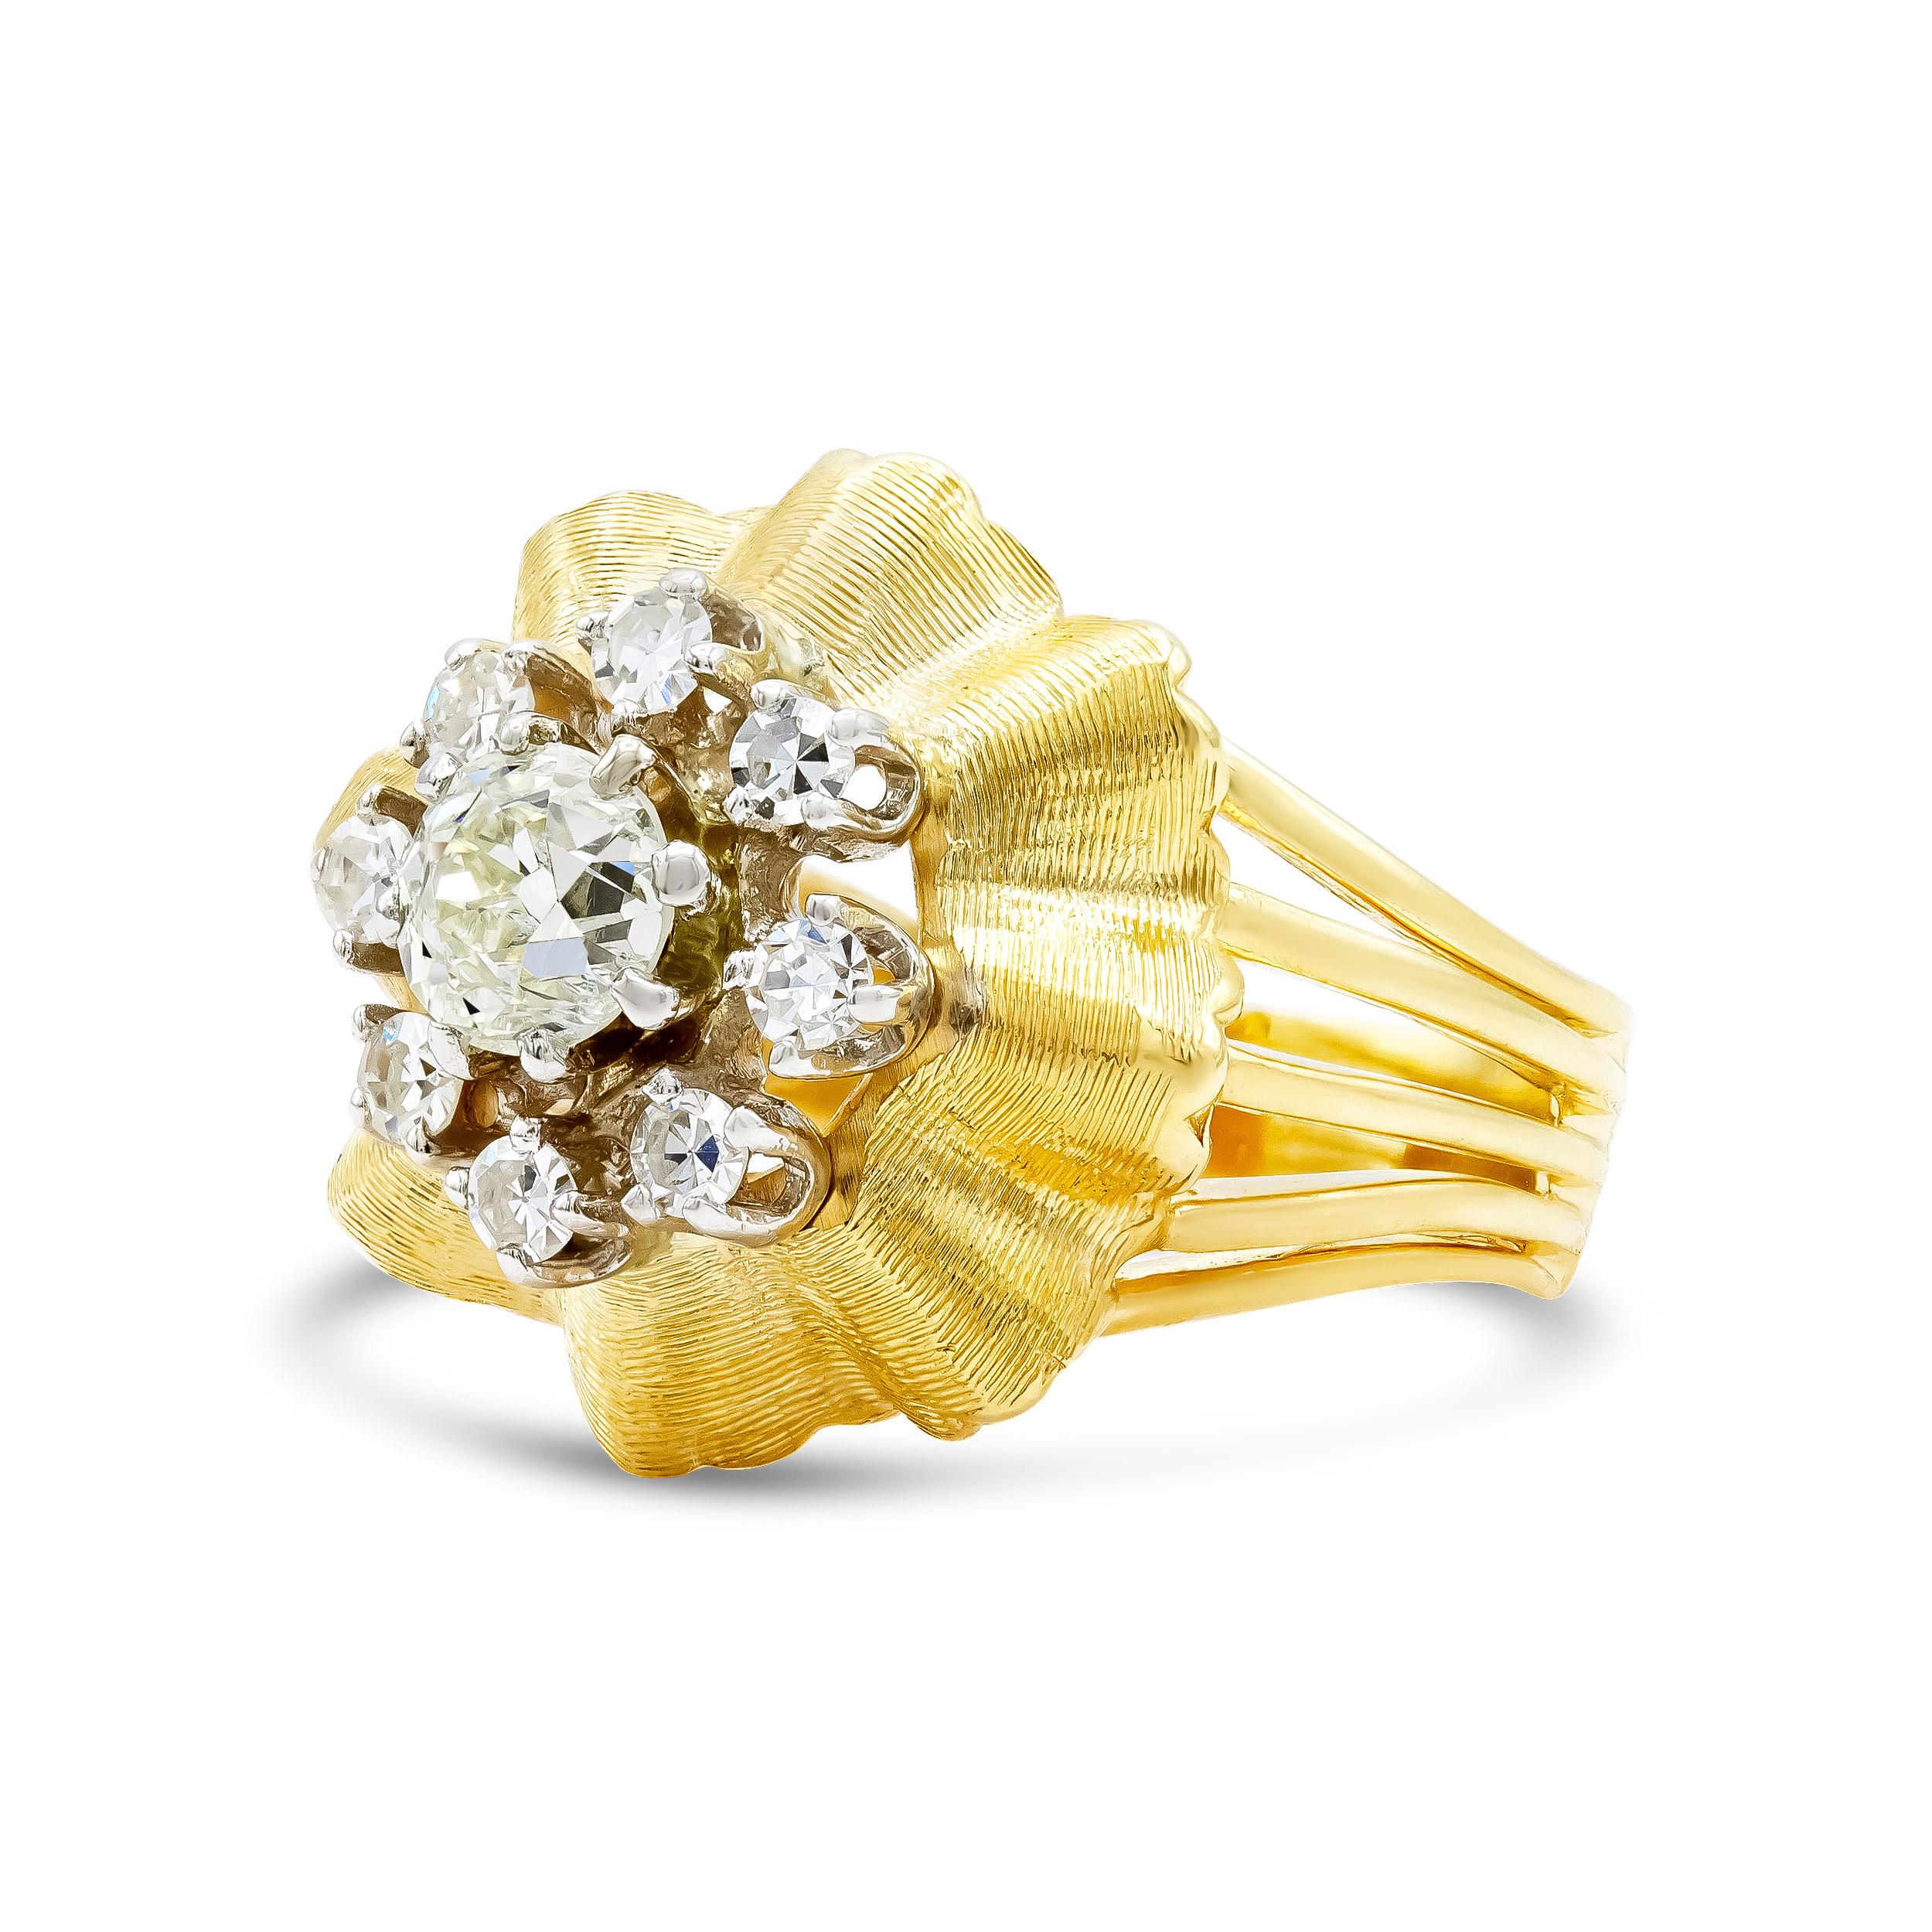 A cluster ring that packs a punch. We love a bold yellow gold ring, especially one that holds 1.50 carats. A perfectly chunky old European cut with a high table and huge culet at the center of this cluster, surrounded by eight other diamonds. We